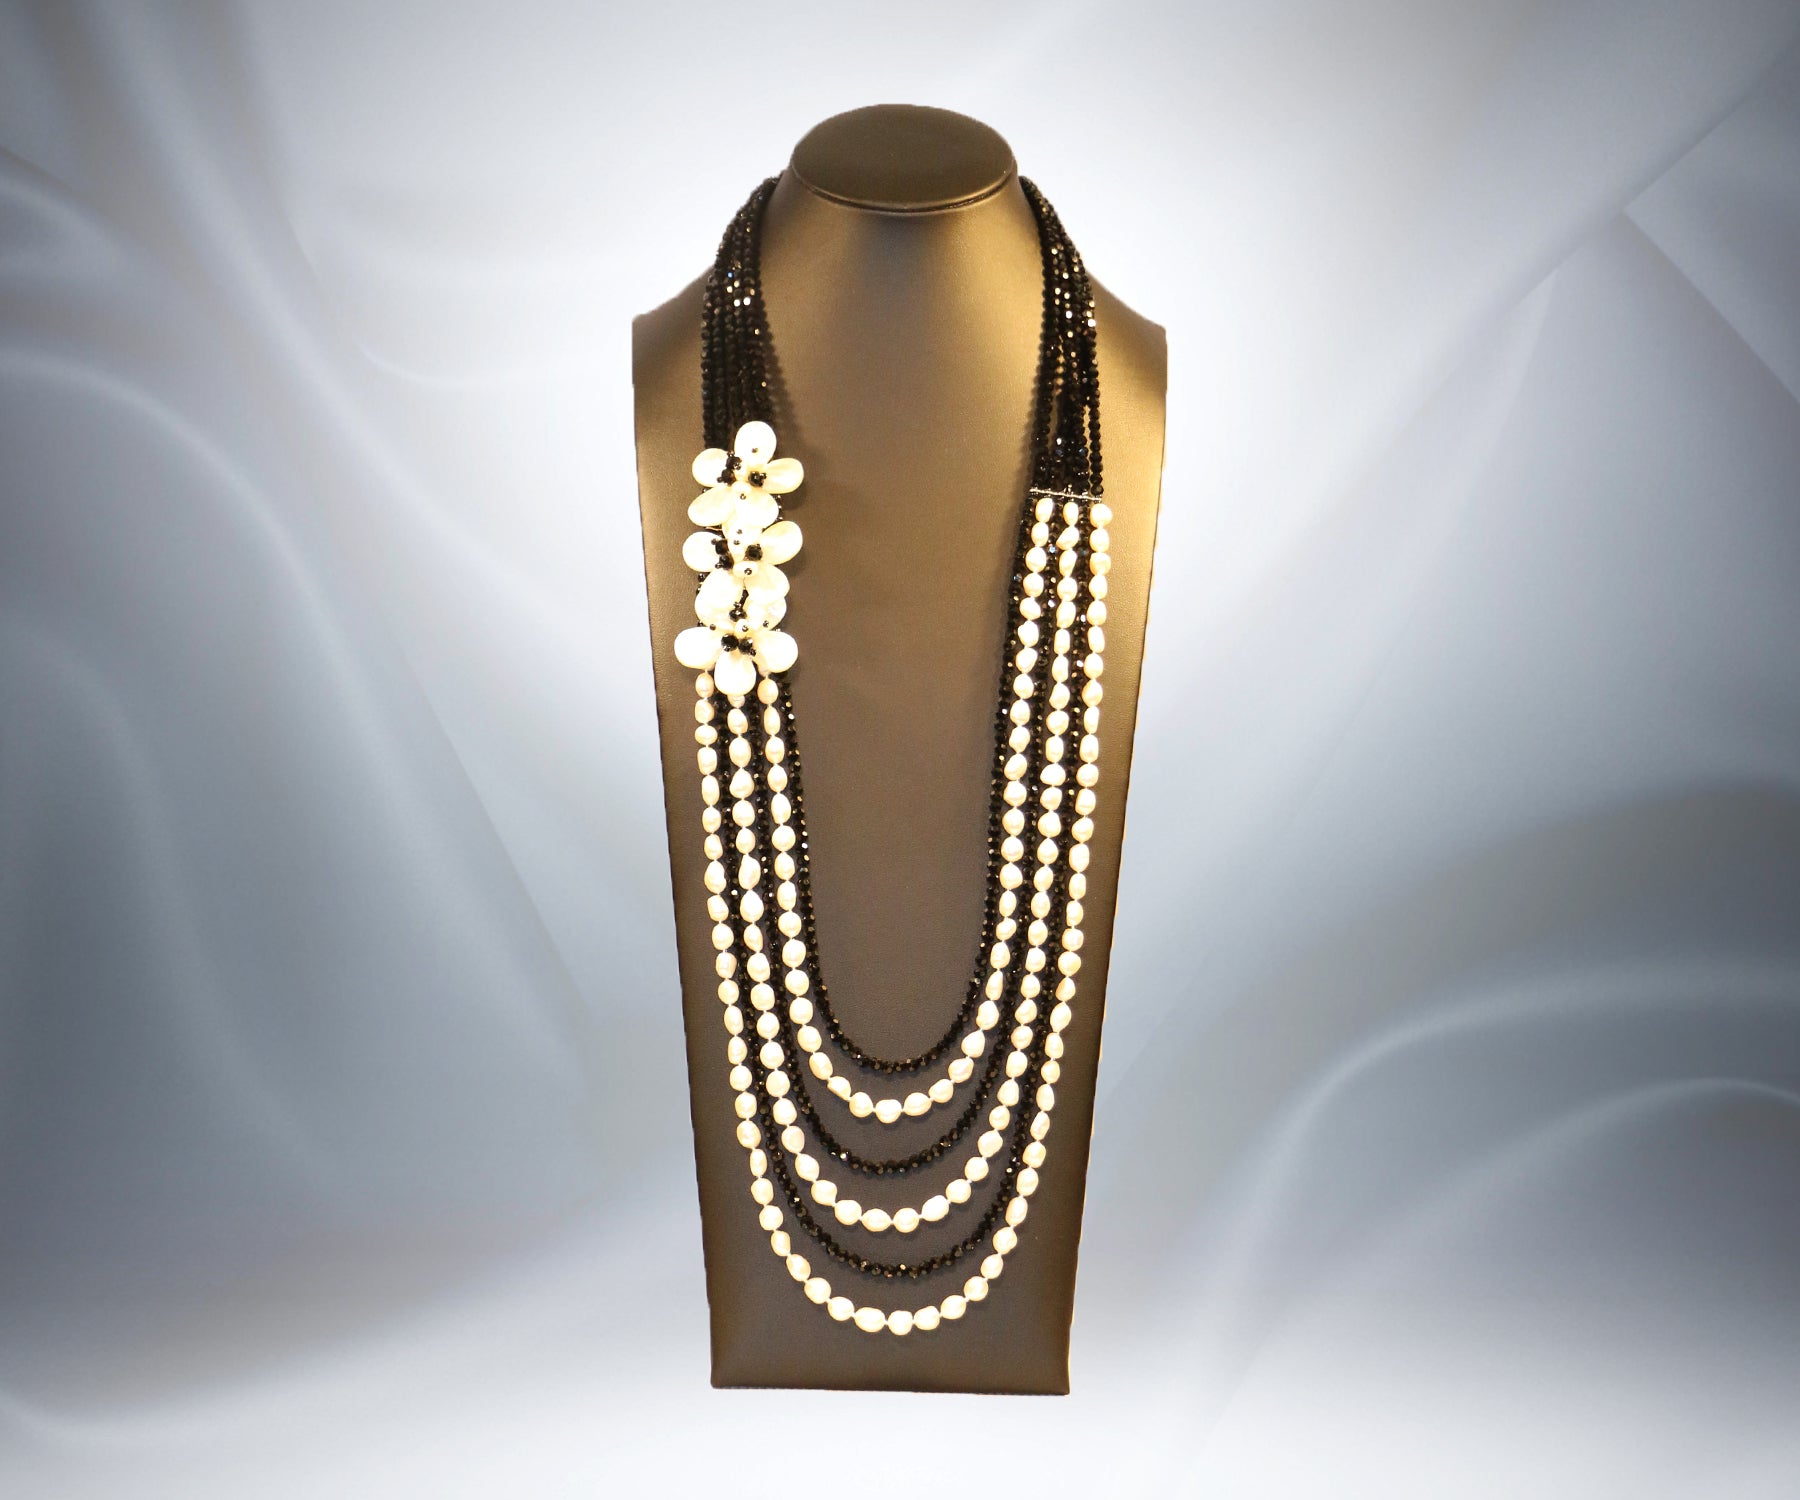 Sold at Auction: Pearl, Onyx and 14K Necklace